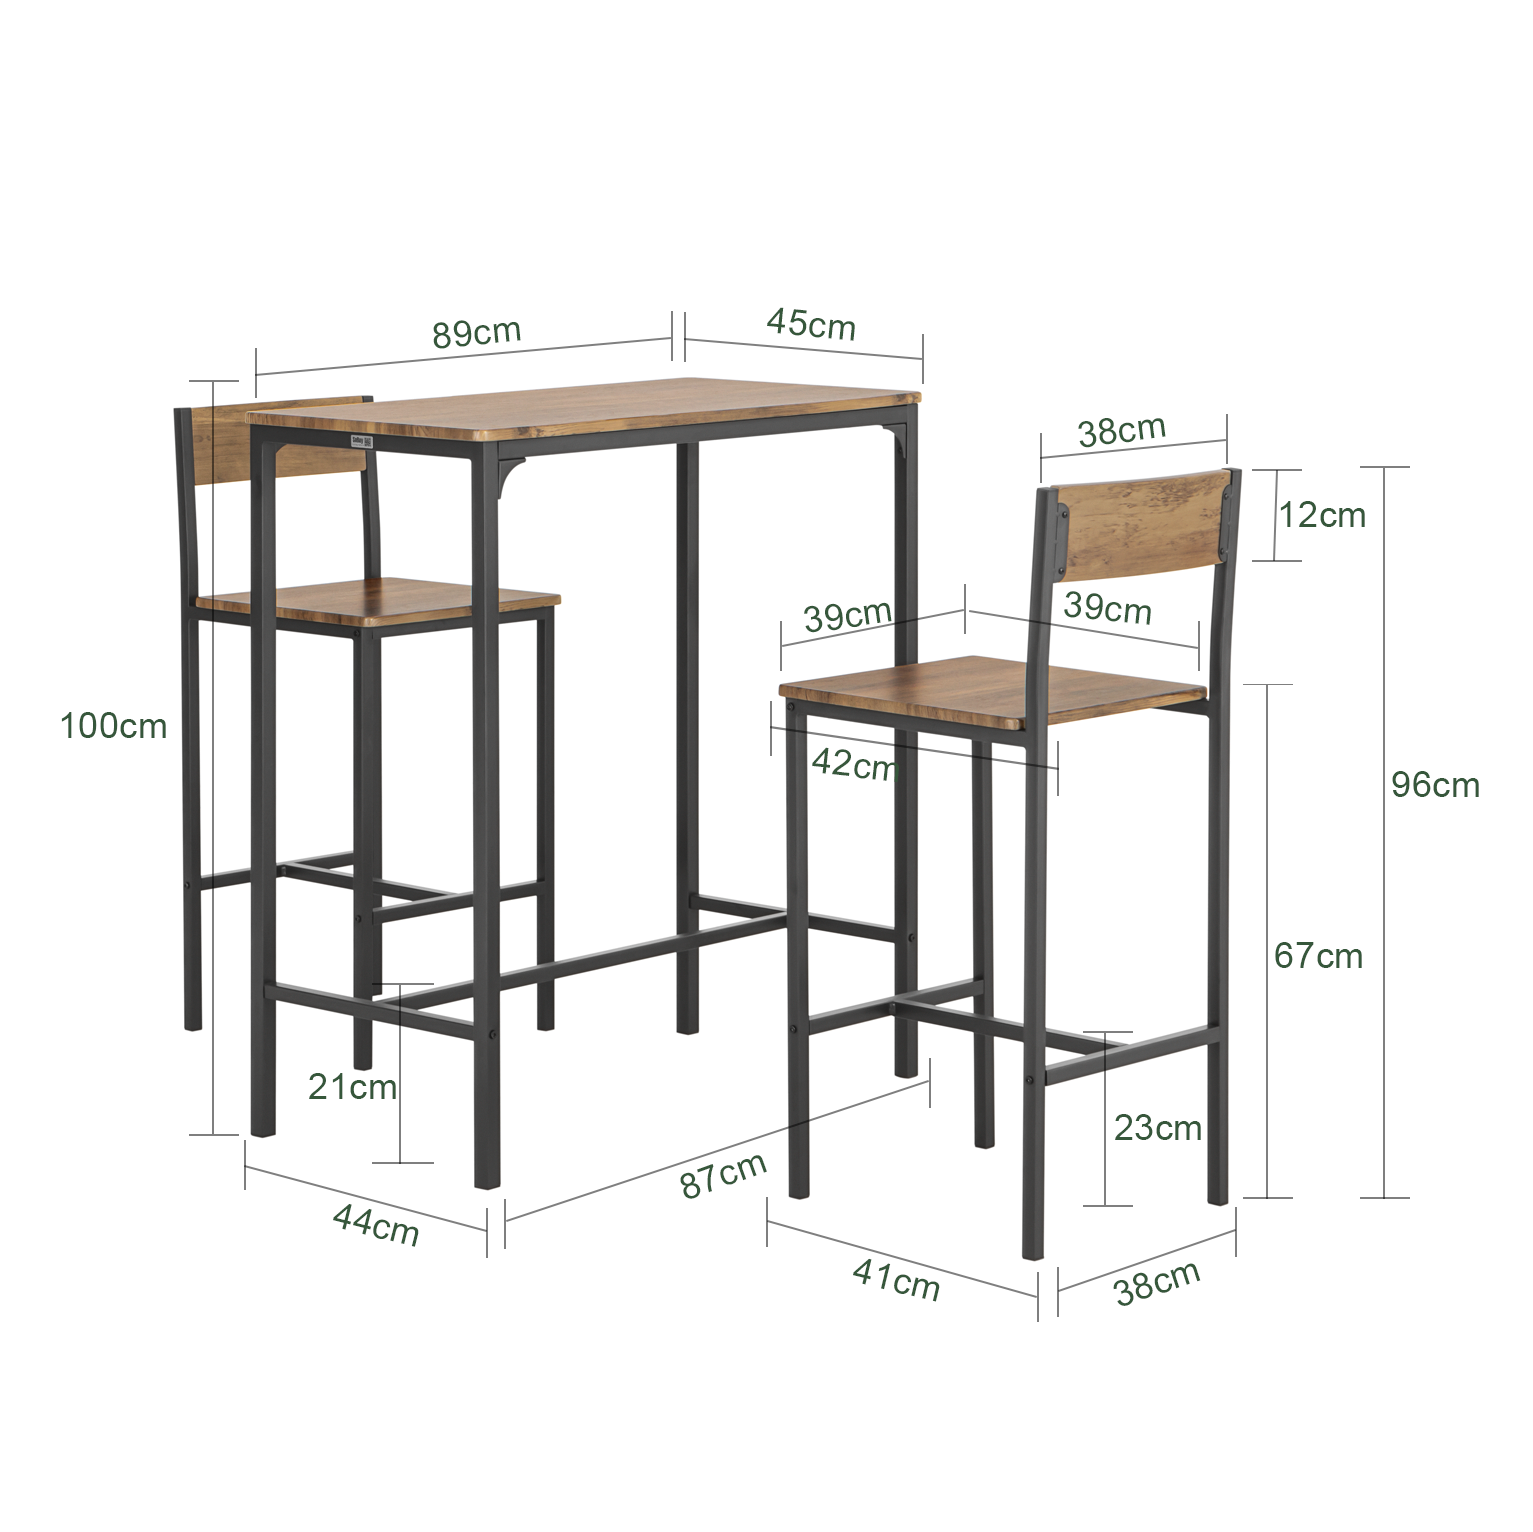 SoBuy OGT03-XL, Bar Set-1 Bar Table and 2 Stools, 3 Pieces Home Kitchen Breakfast Bar Set Furniture Dining Set?39.4 ”Height Table